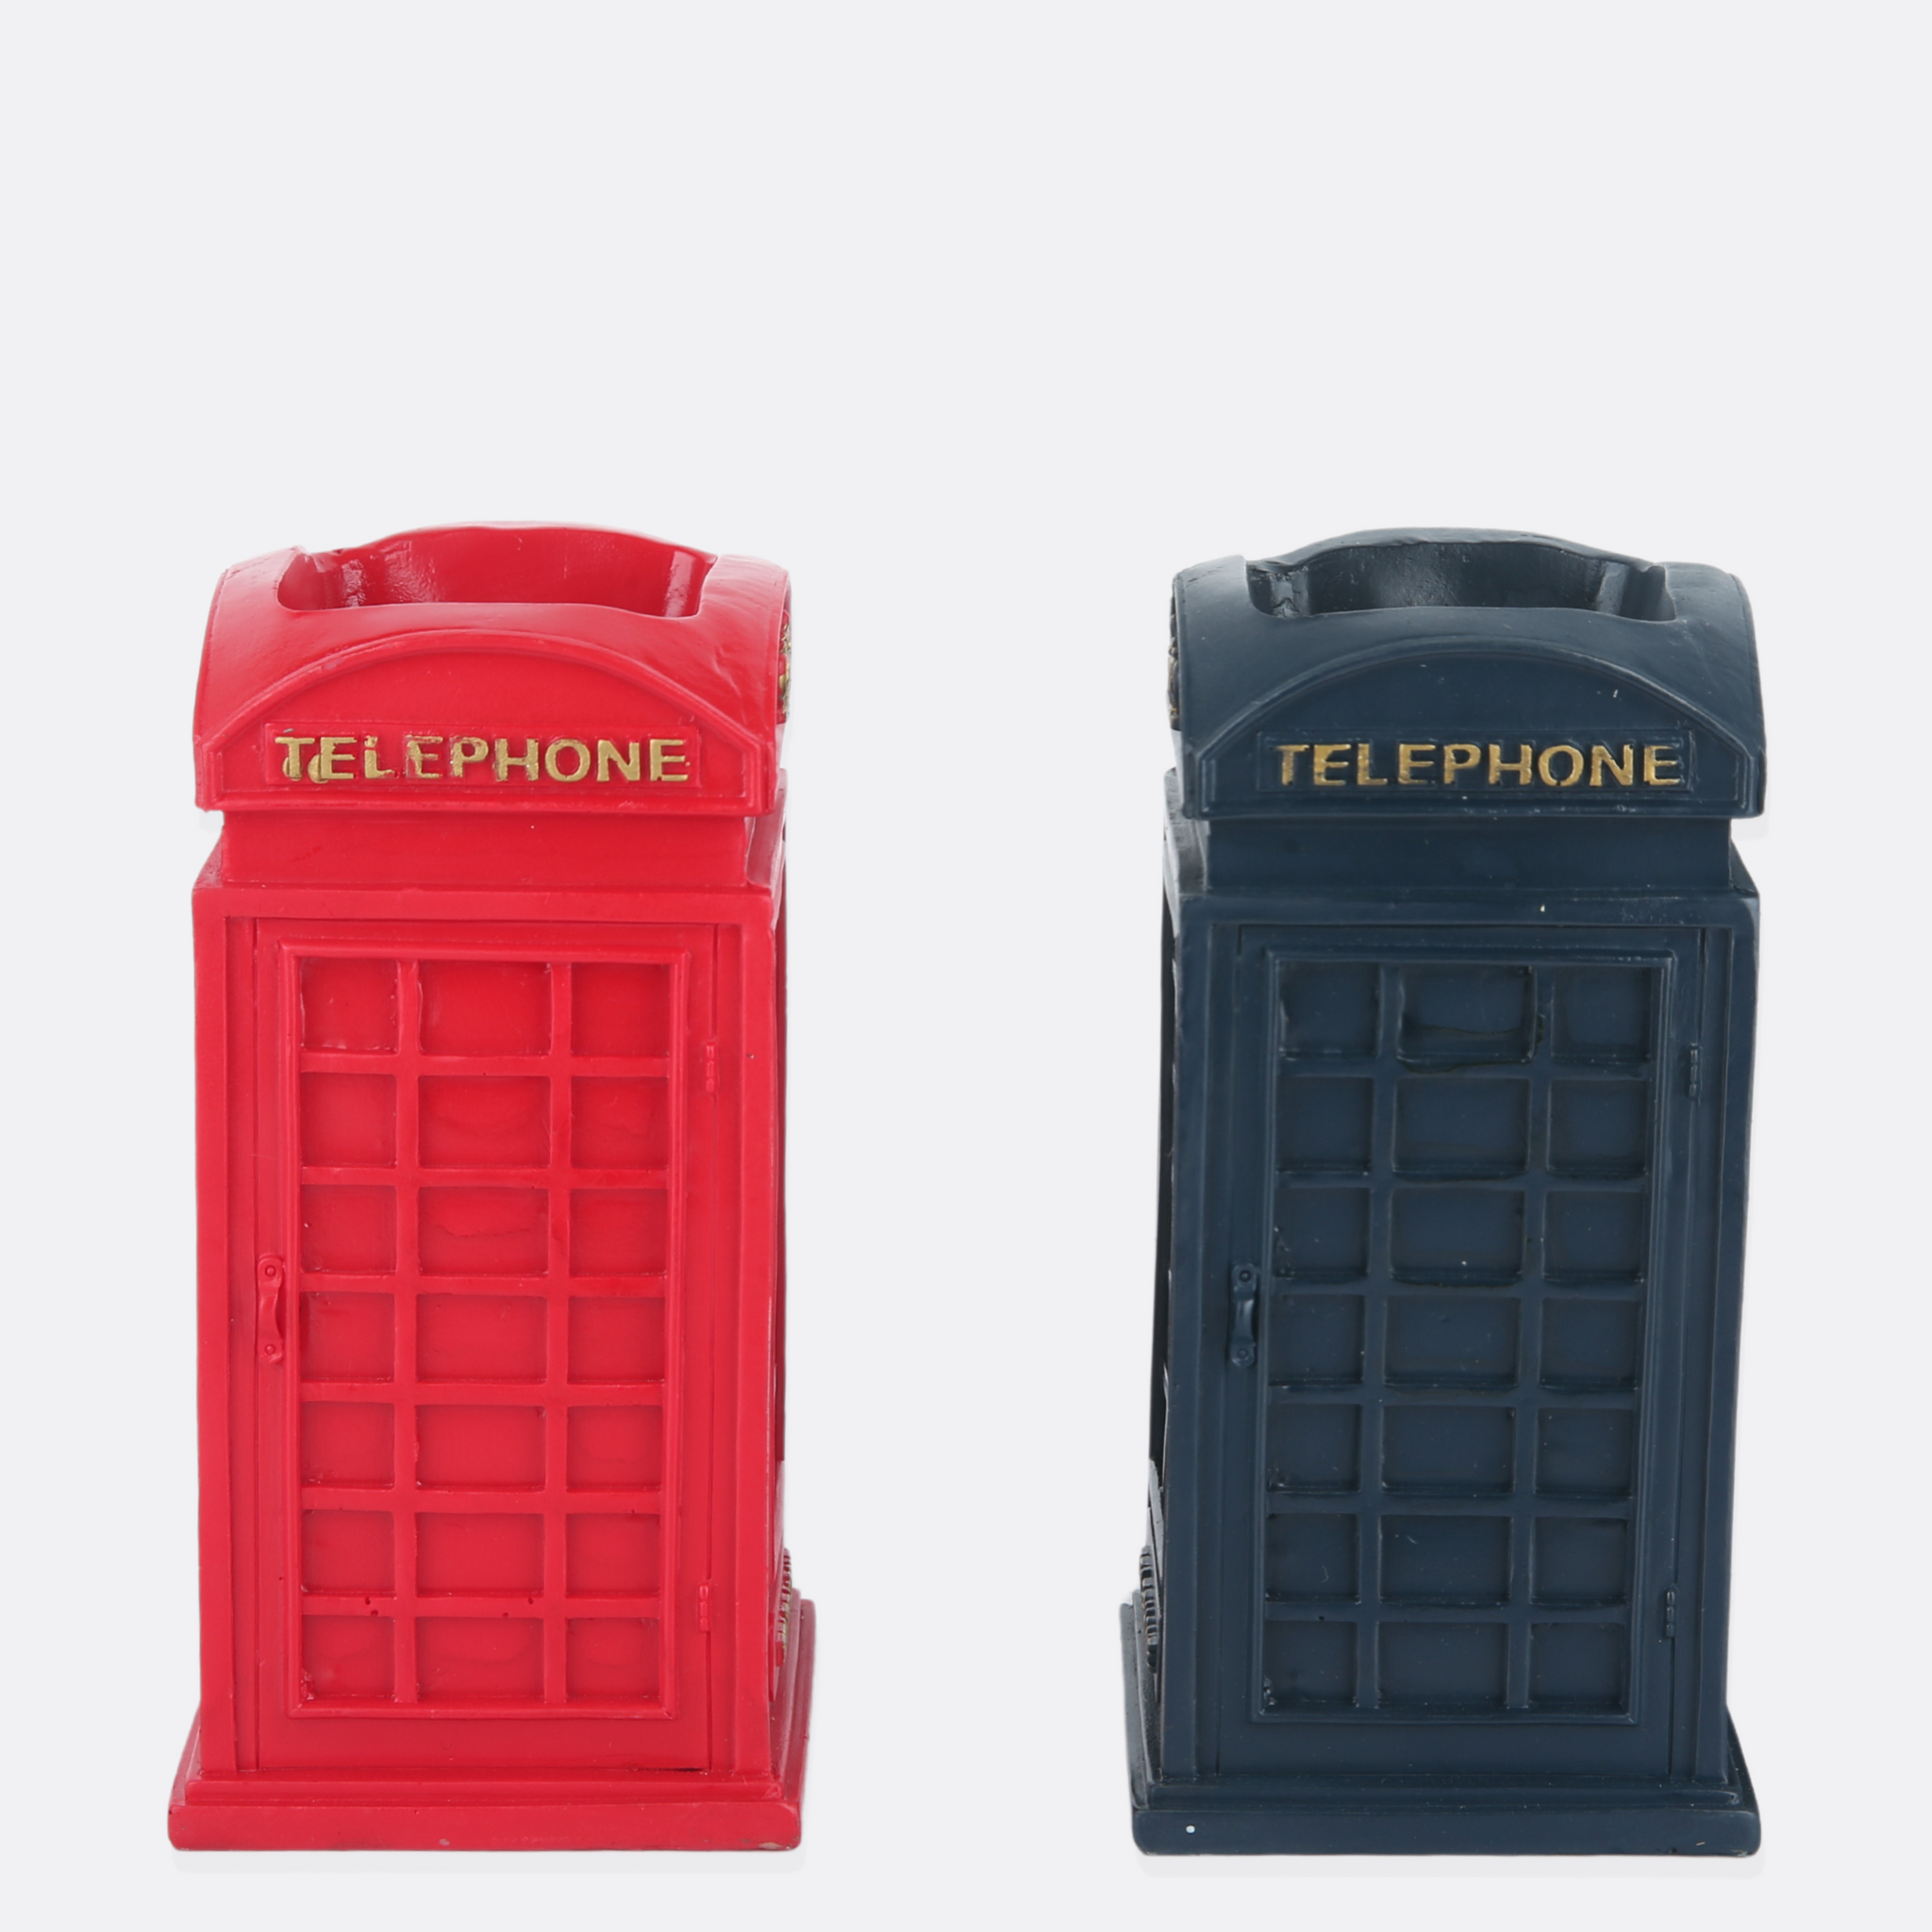 Phone Booth Pen Holder ( Two Colors )